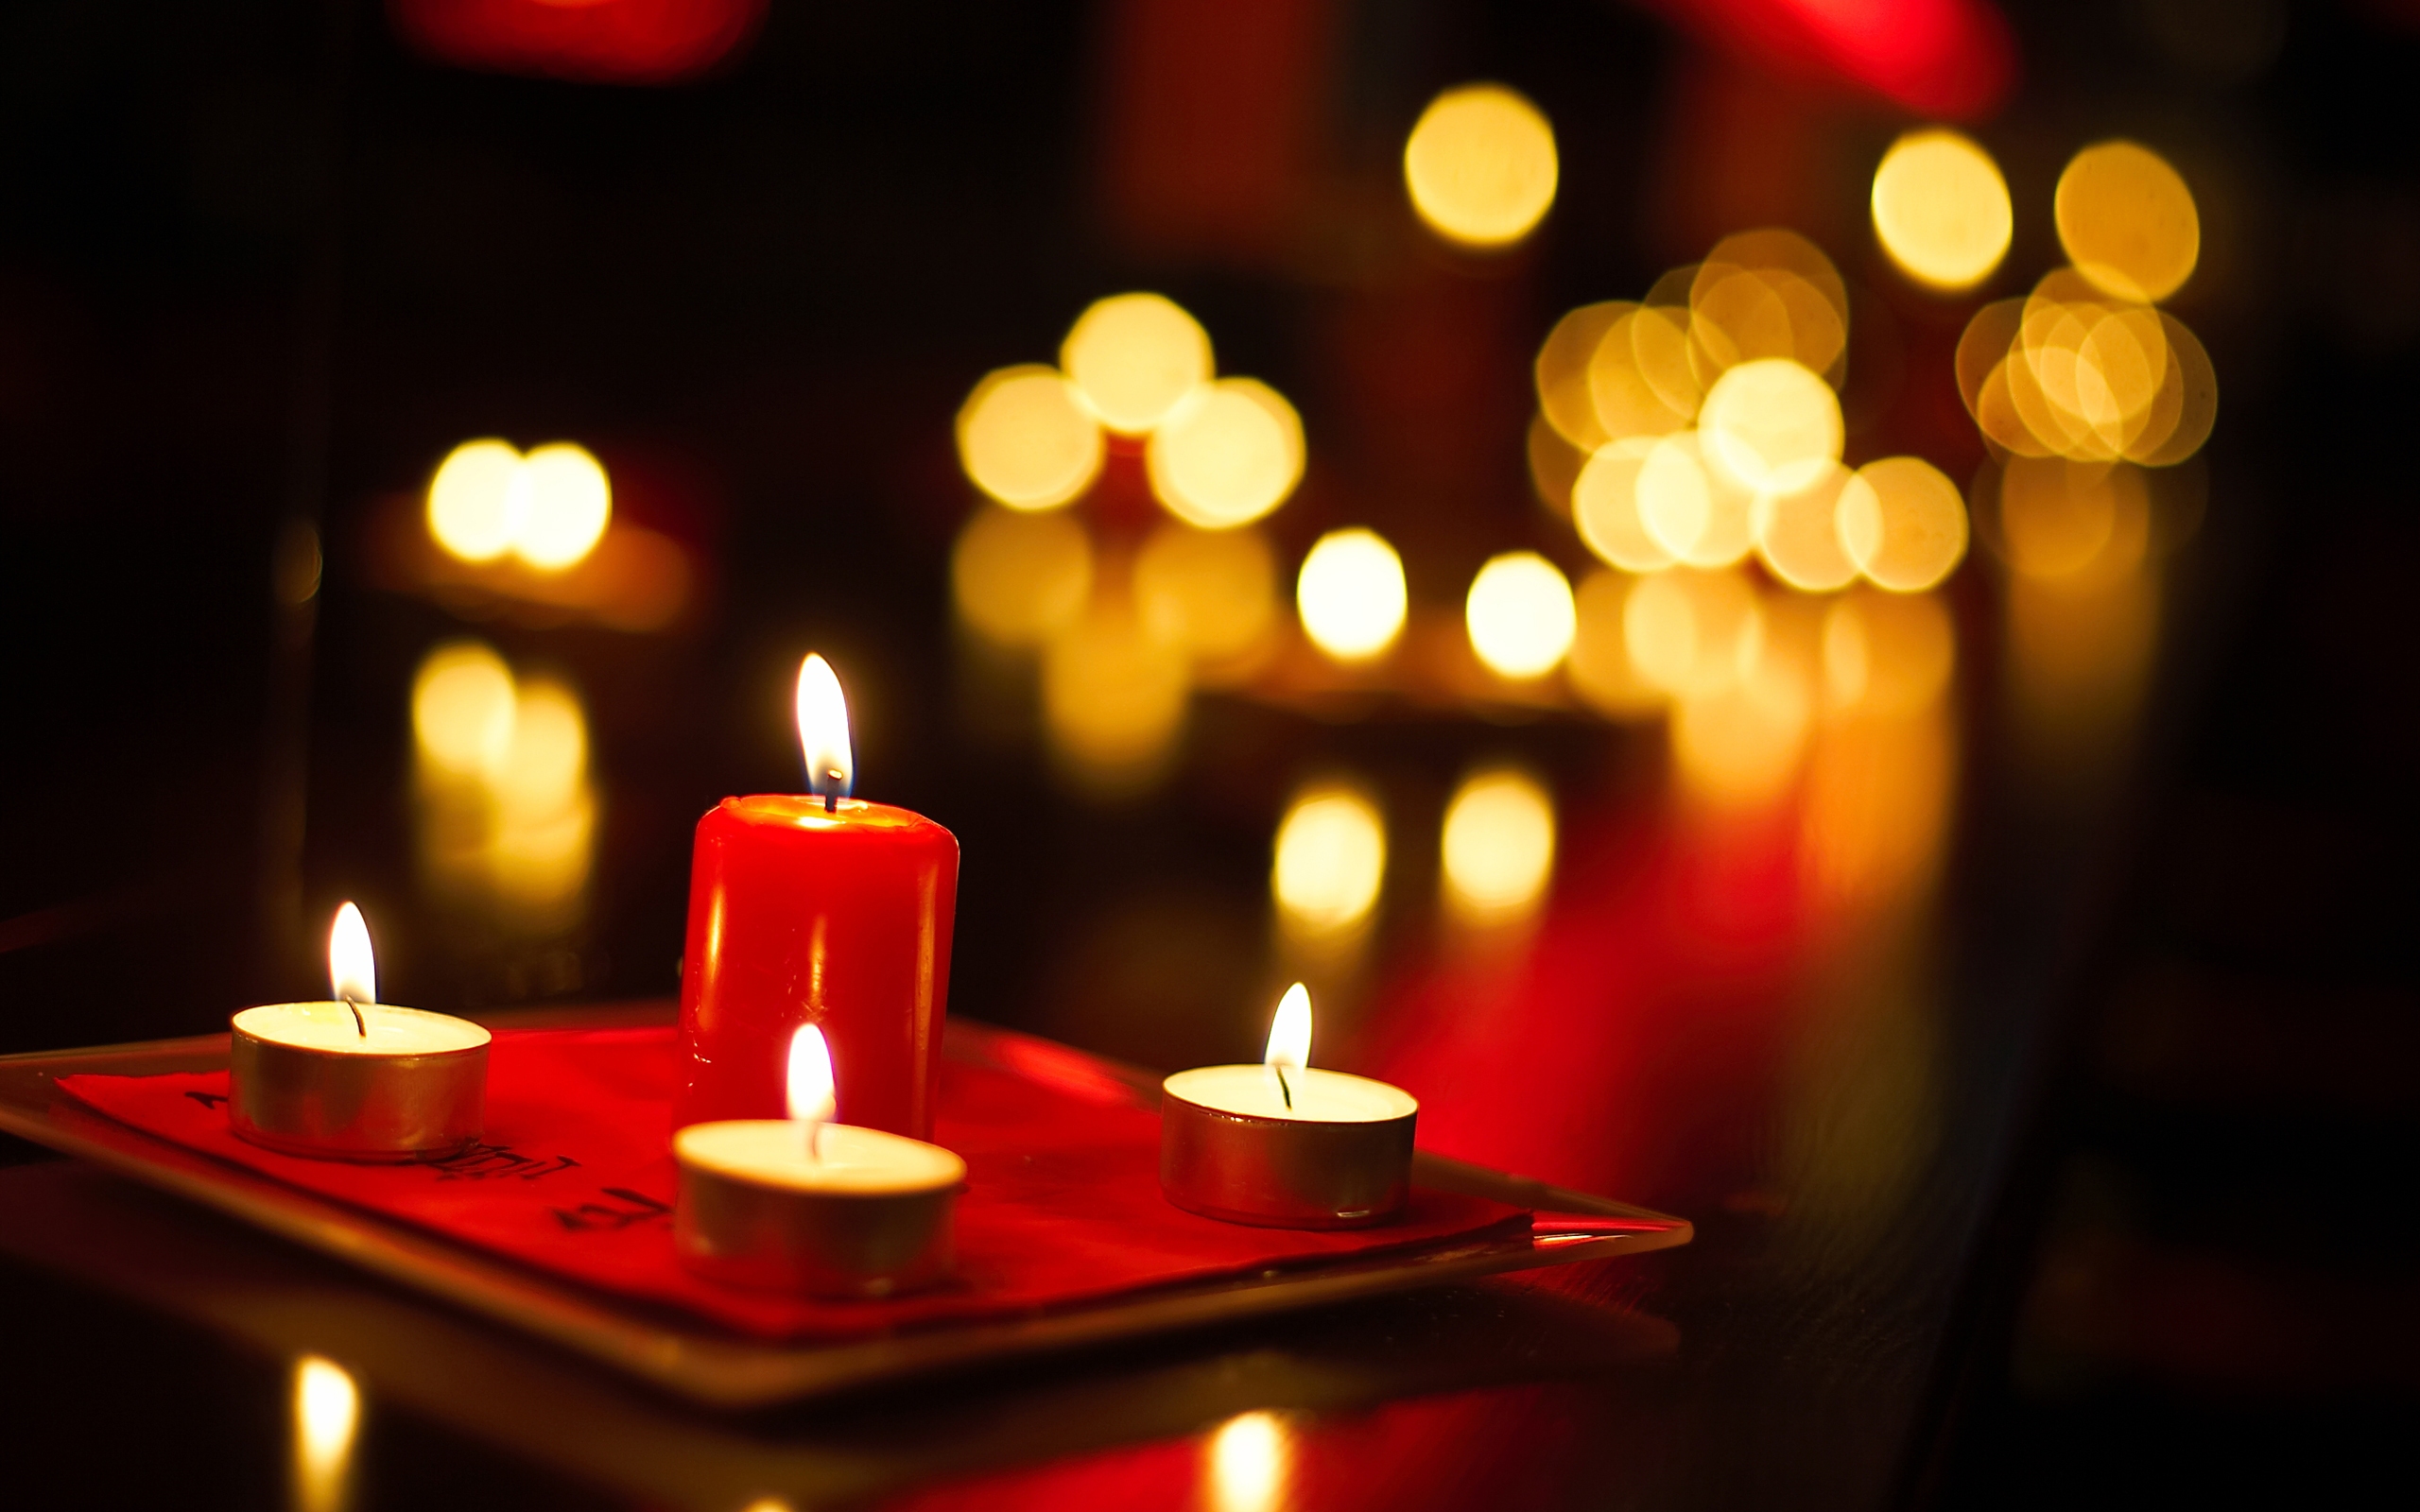 Free Candle Wallpaper 16399 2560x1600 px ~ HDWallSource.com